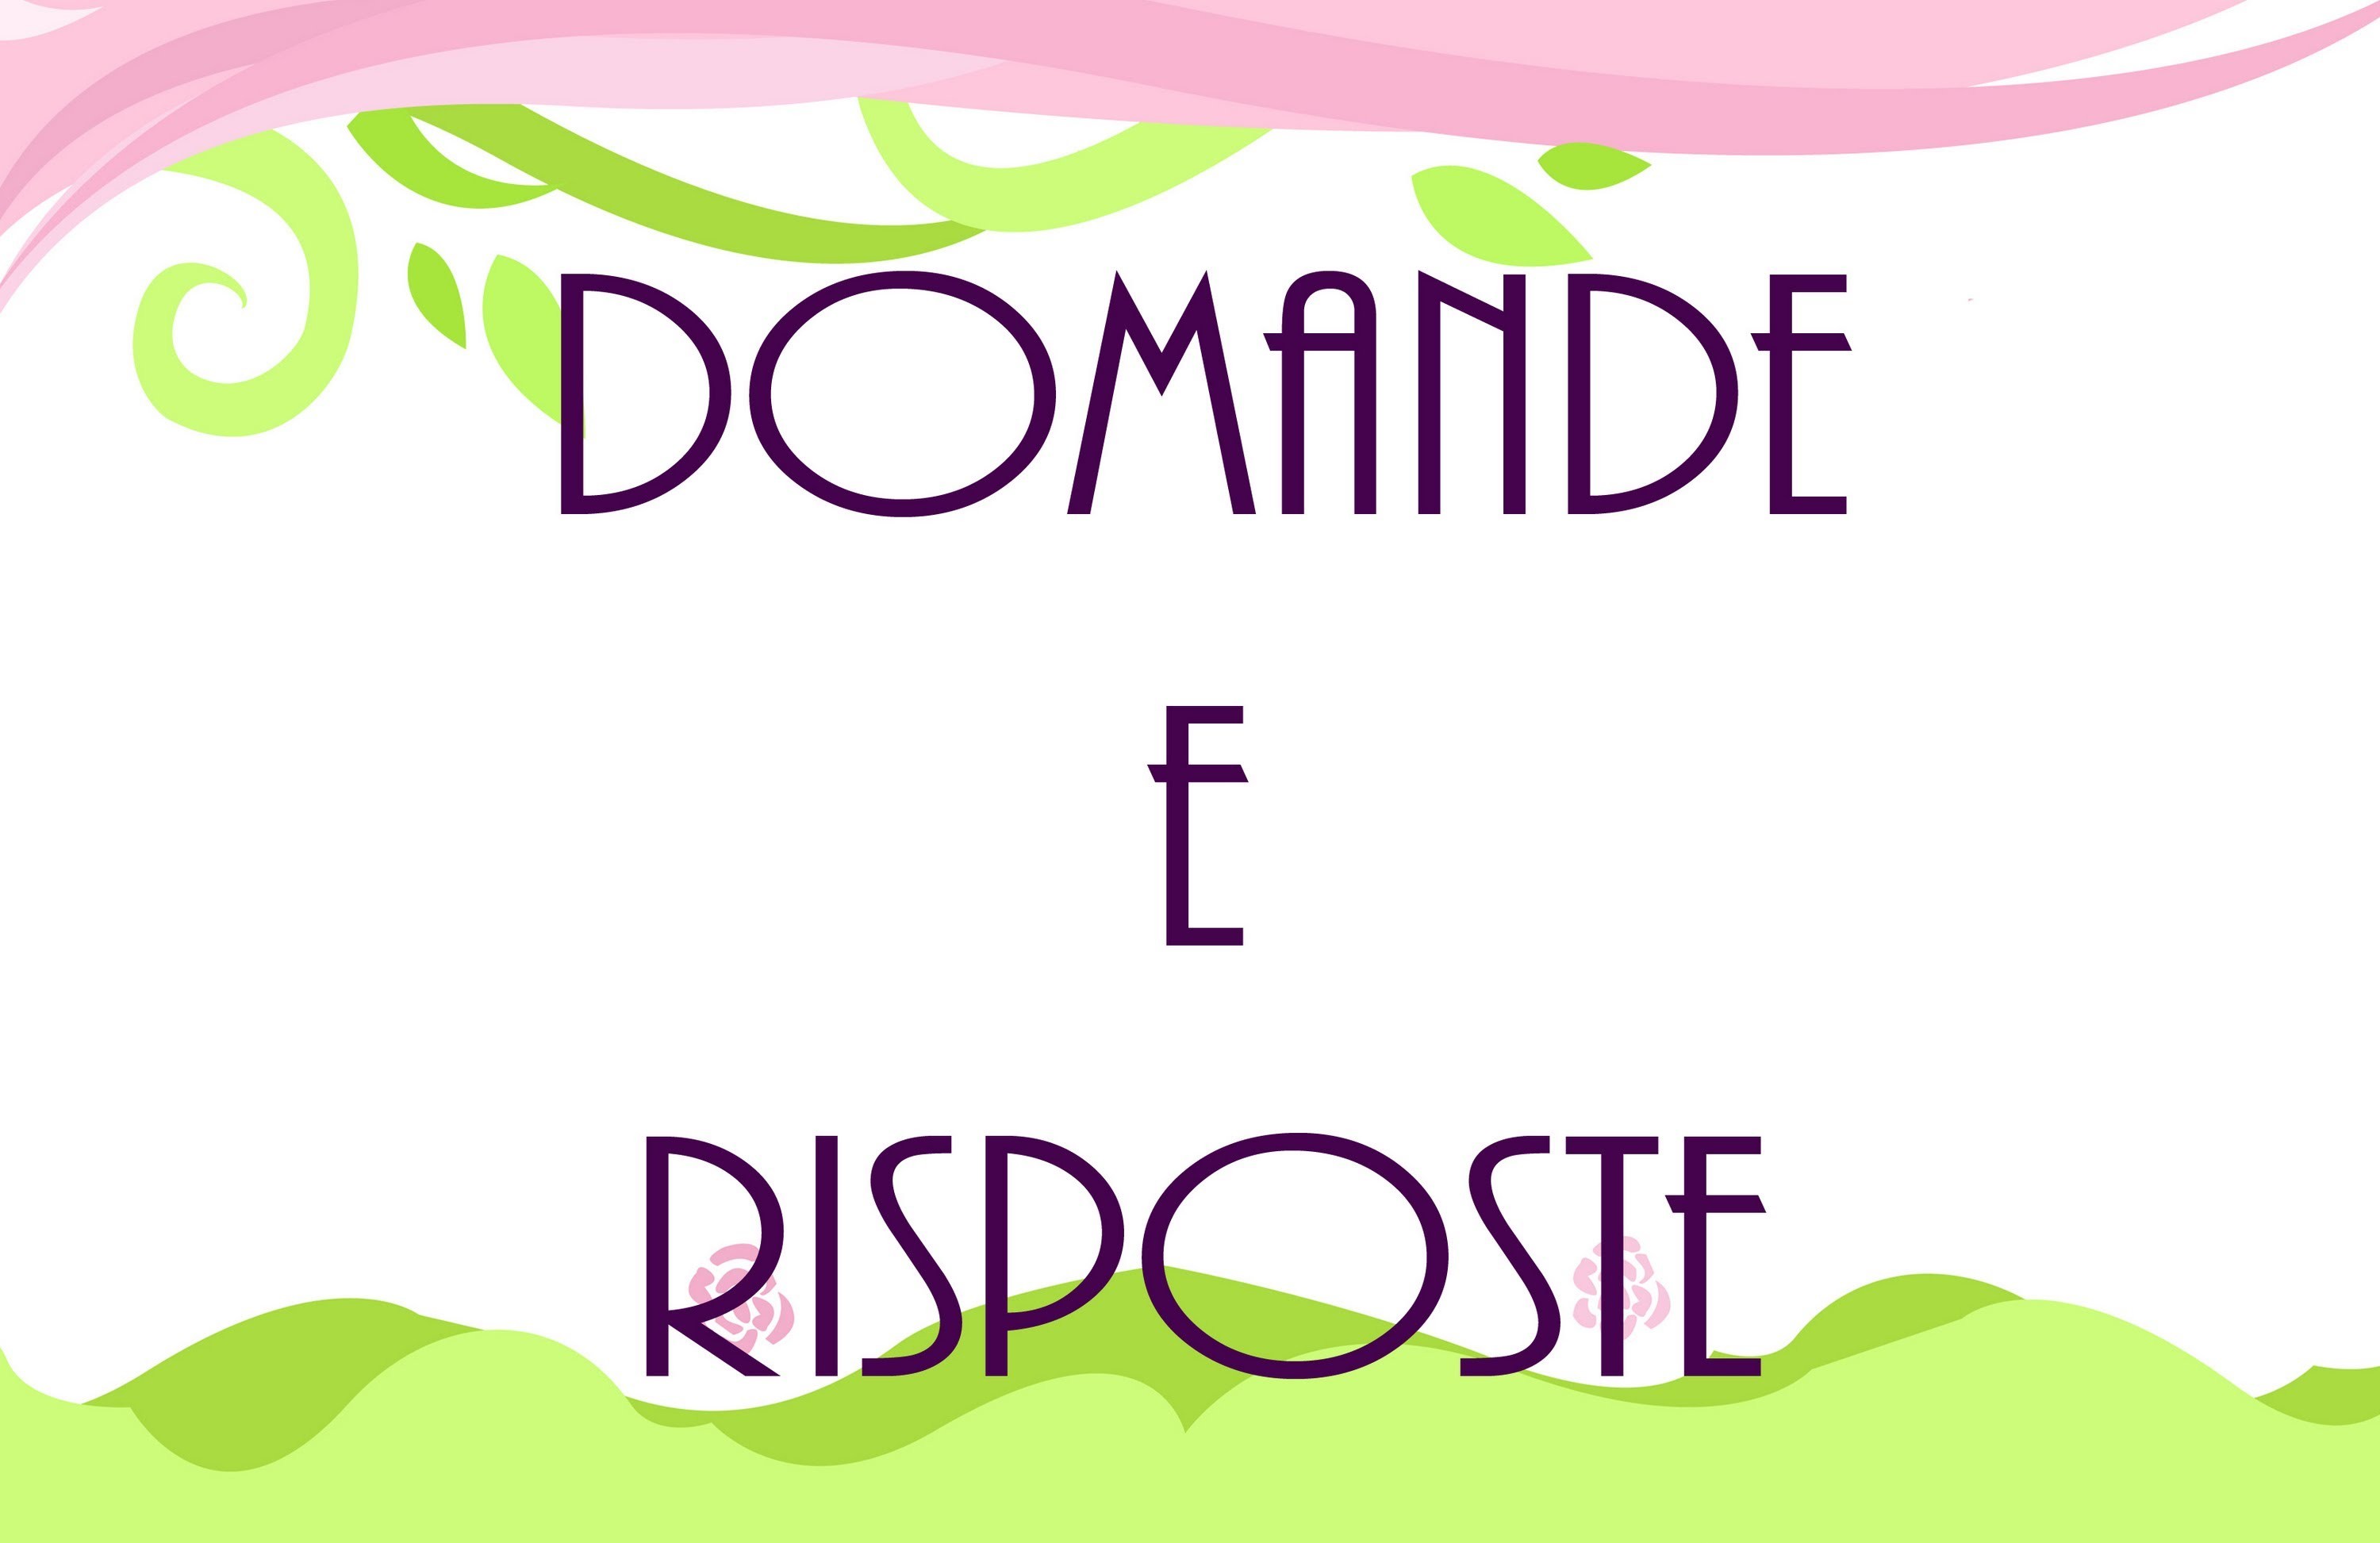 Domande e Risposte ep. 1 - Questions and Answers ep. 1